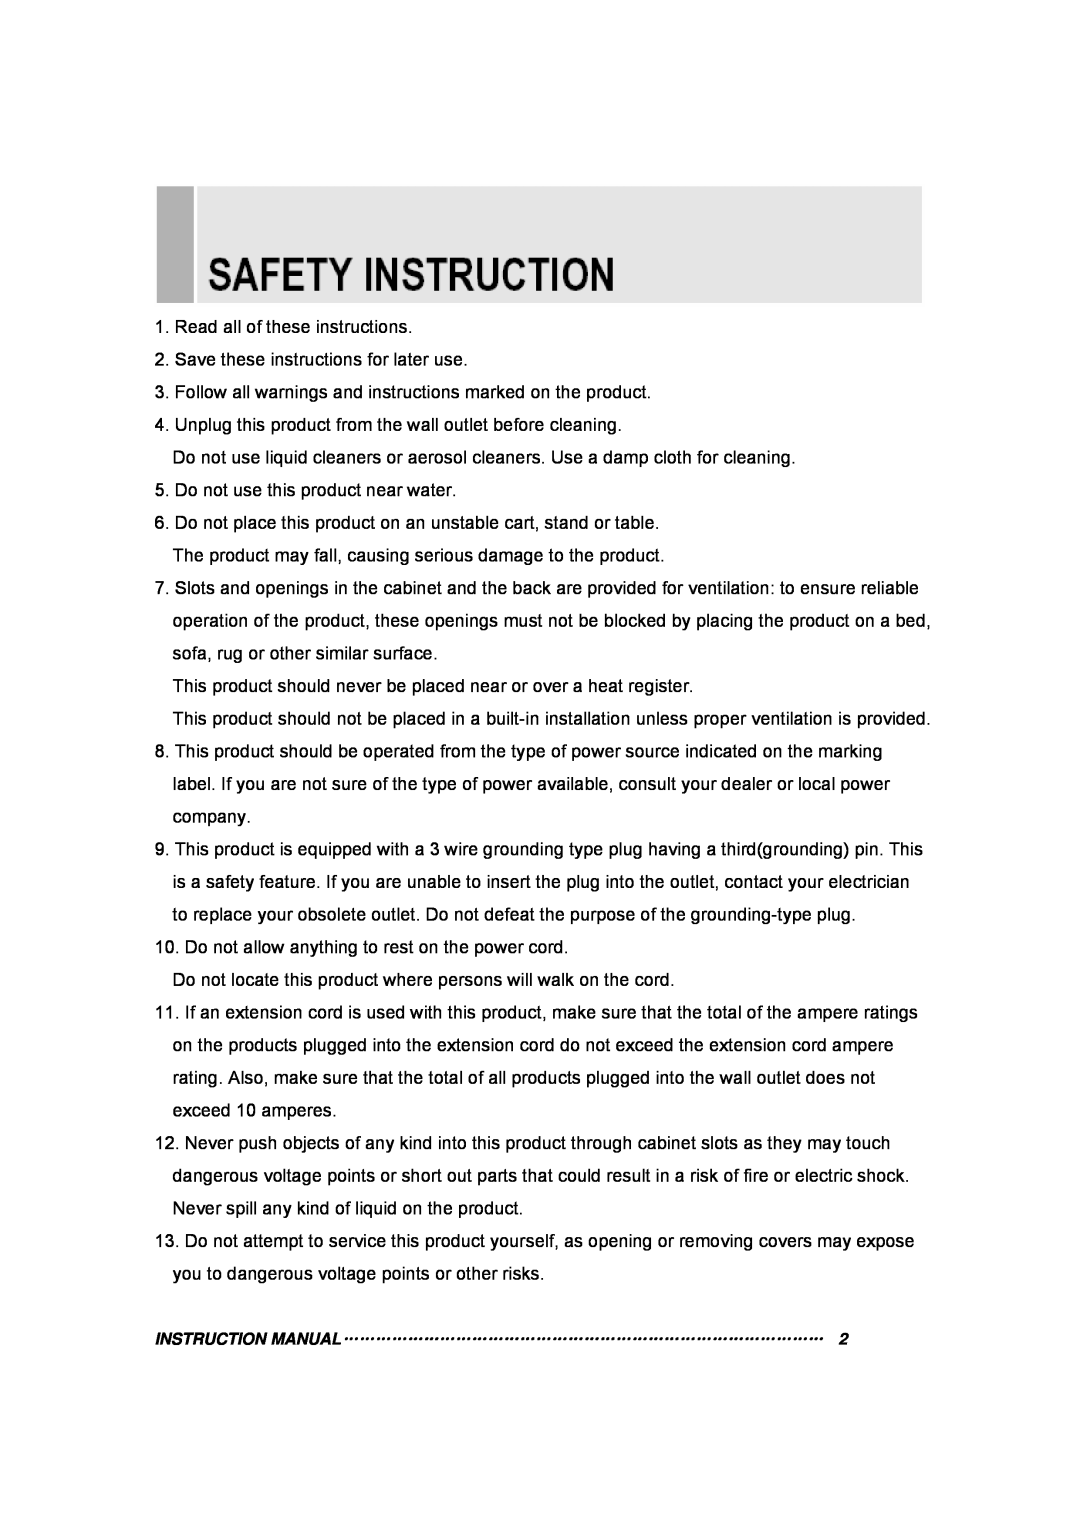 TOA Electronics 15RTV instruction manual Read all of these instructions 